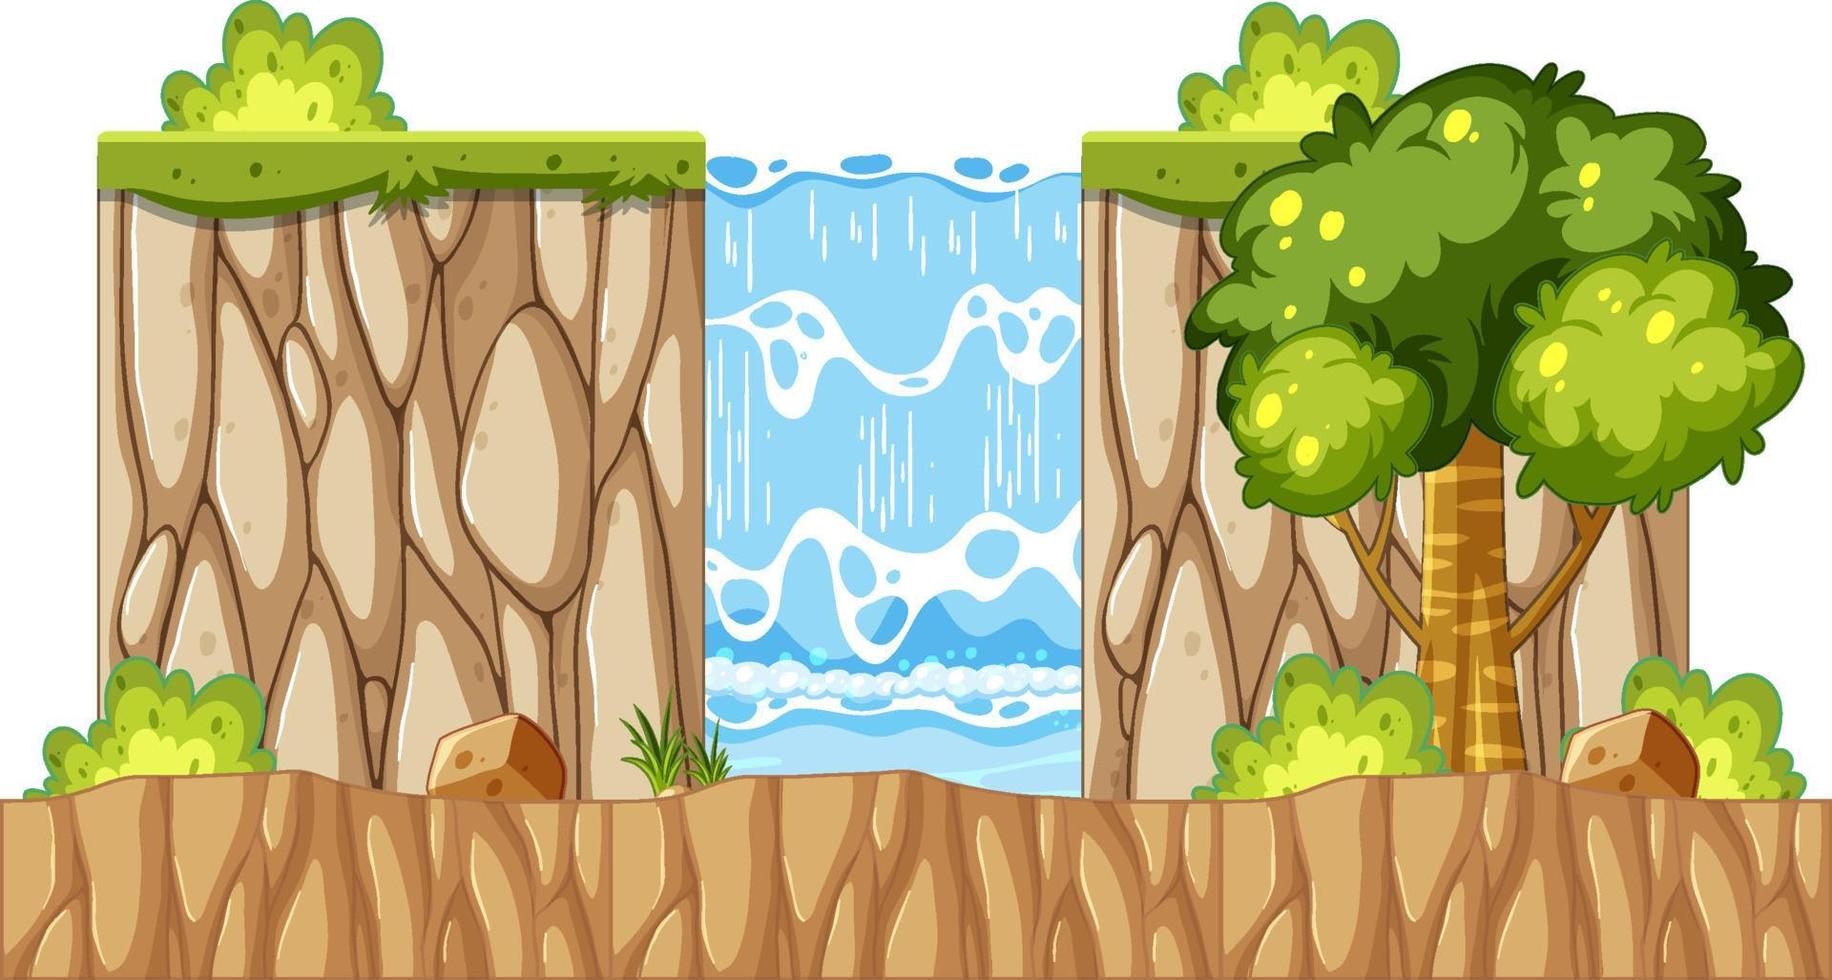 Waterfall in nature on white background vector